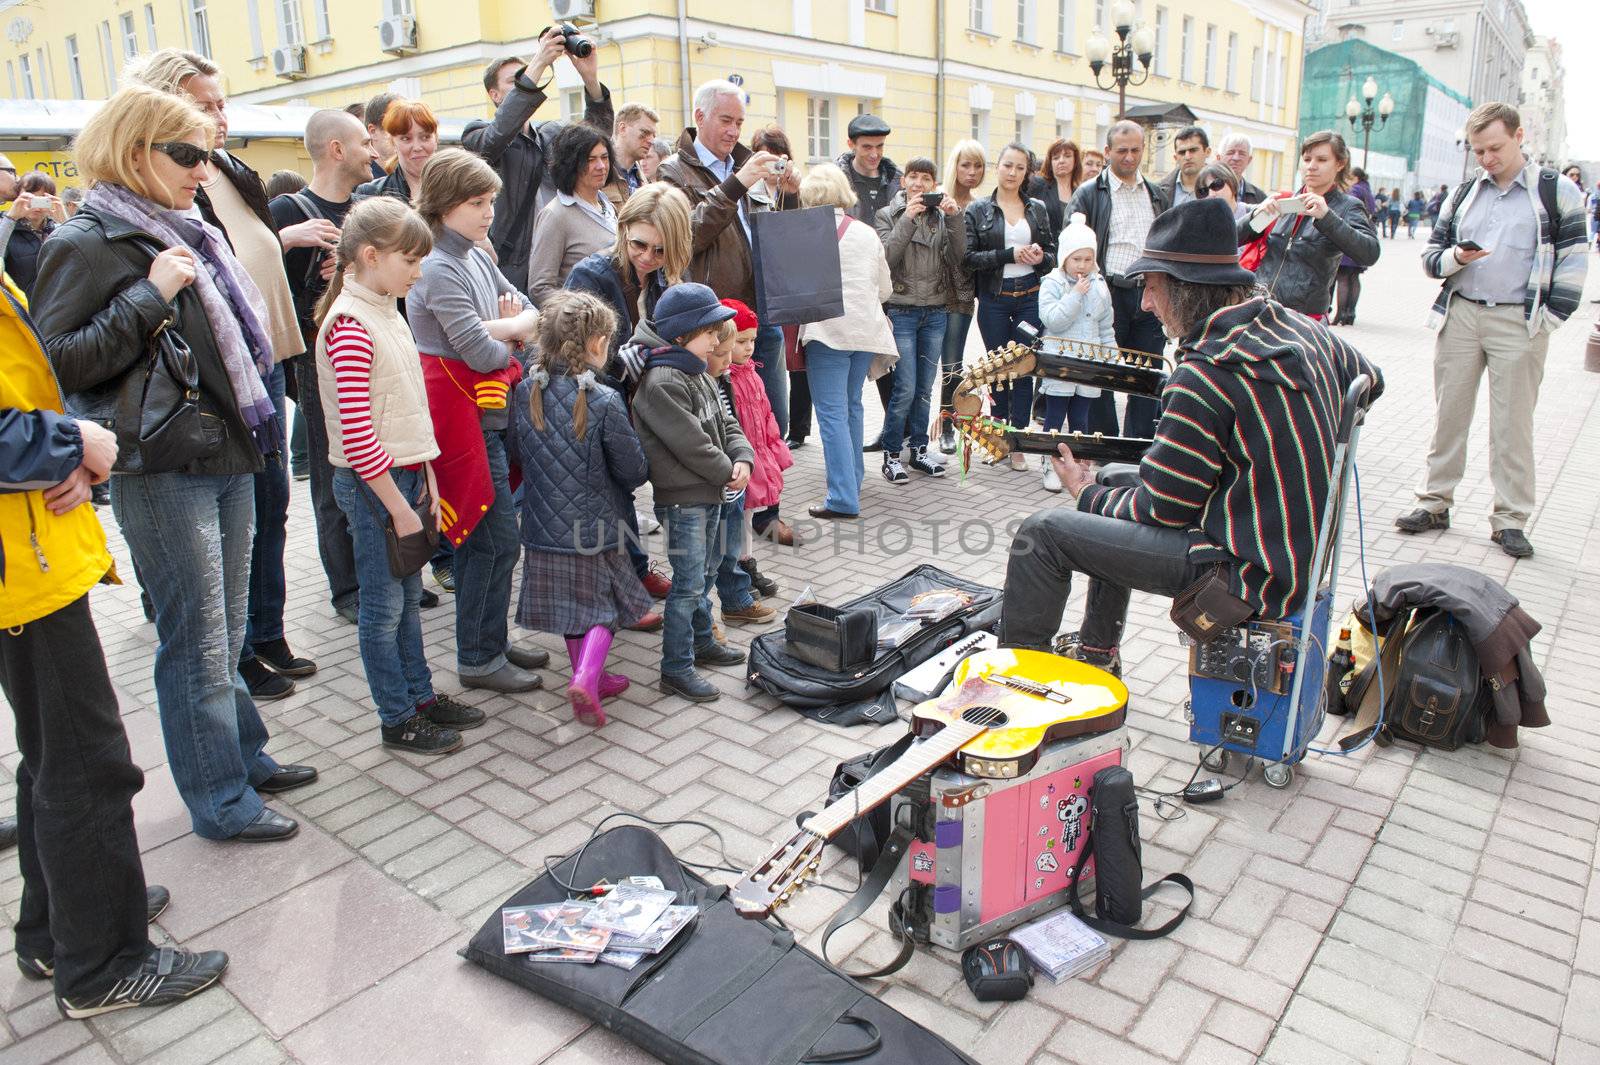 Street musician in Moscow Russia, taken on April 2012